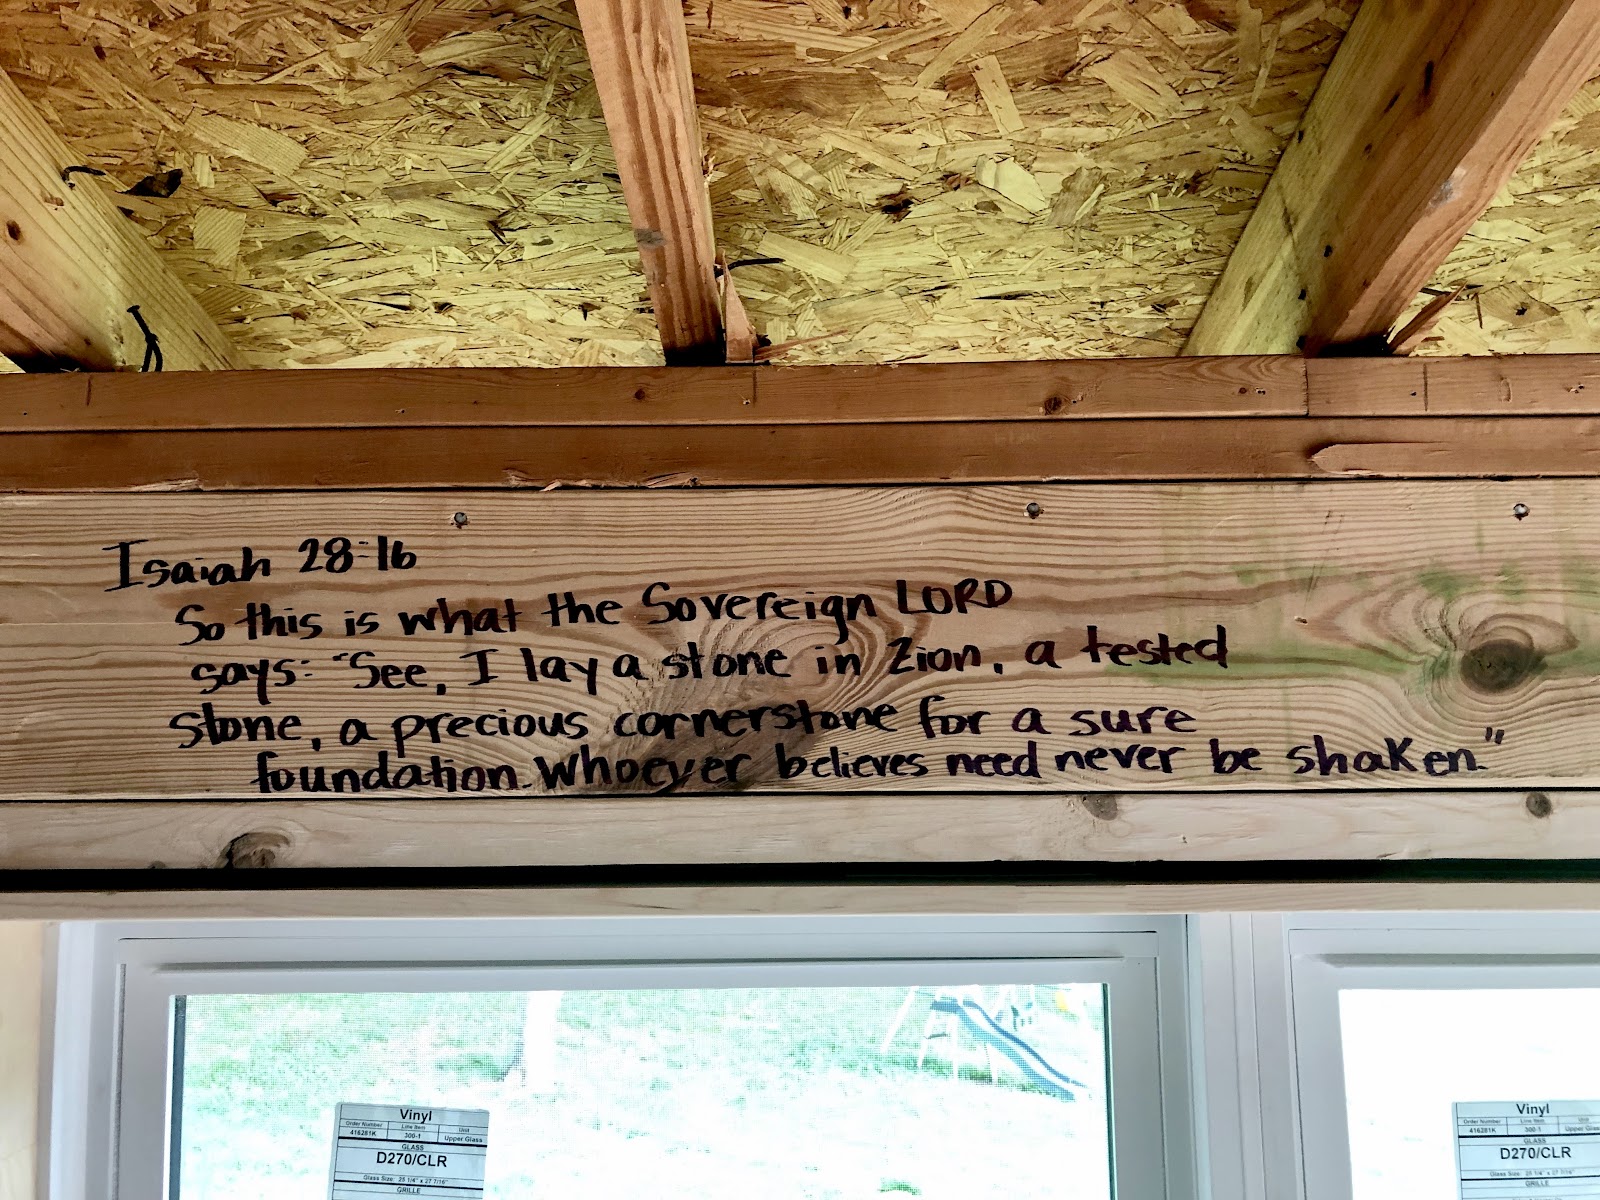 scripture written on studs of new build home isaiah 28:16 safe in tn tornadoes